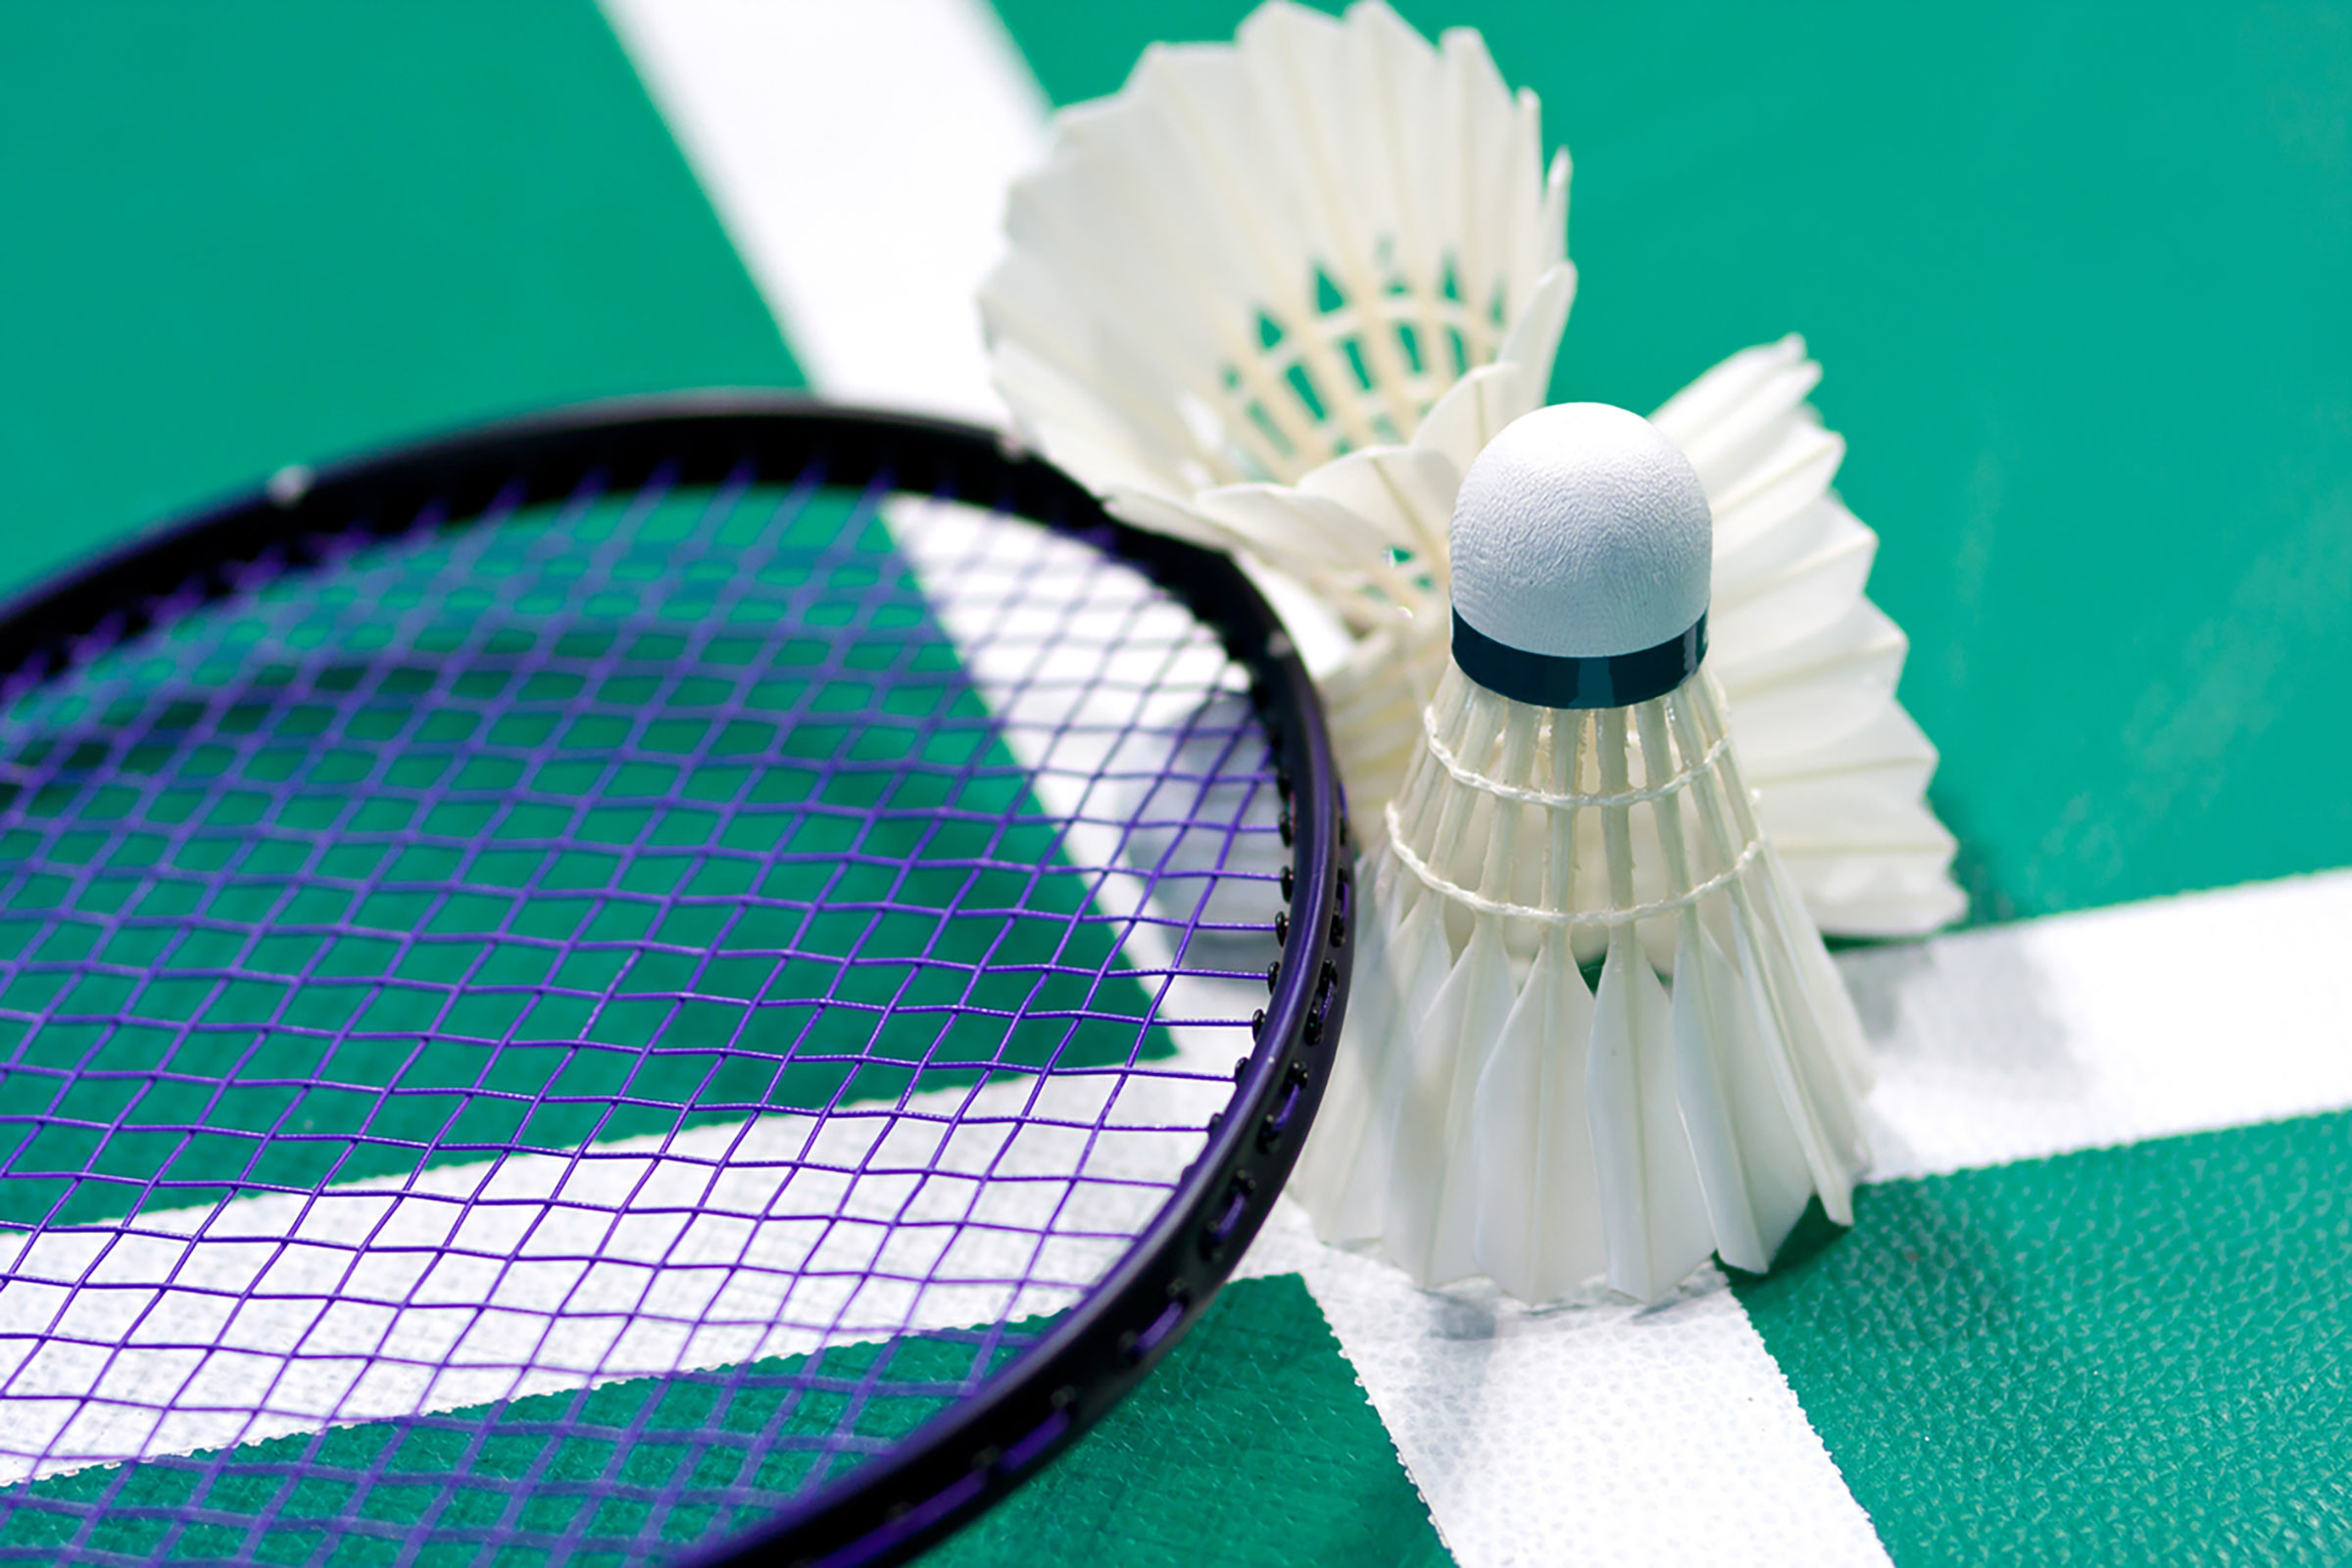 Dynamic badminton wallpapers, Powerful shots, Fast-paced action, Sporting passion, 2400x1600 HD Desktop